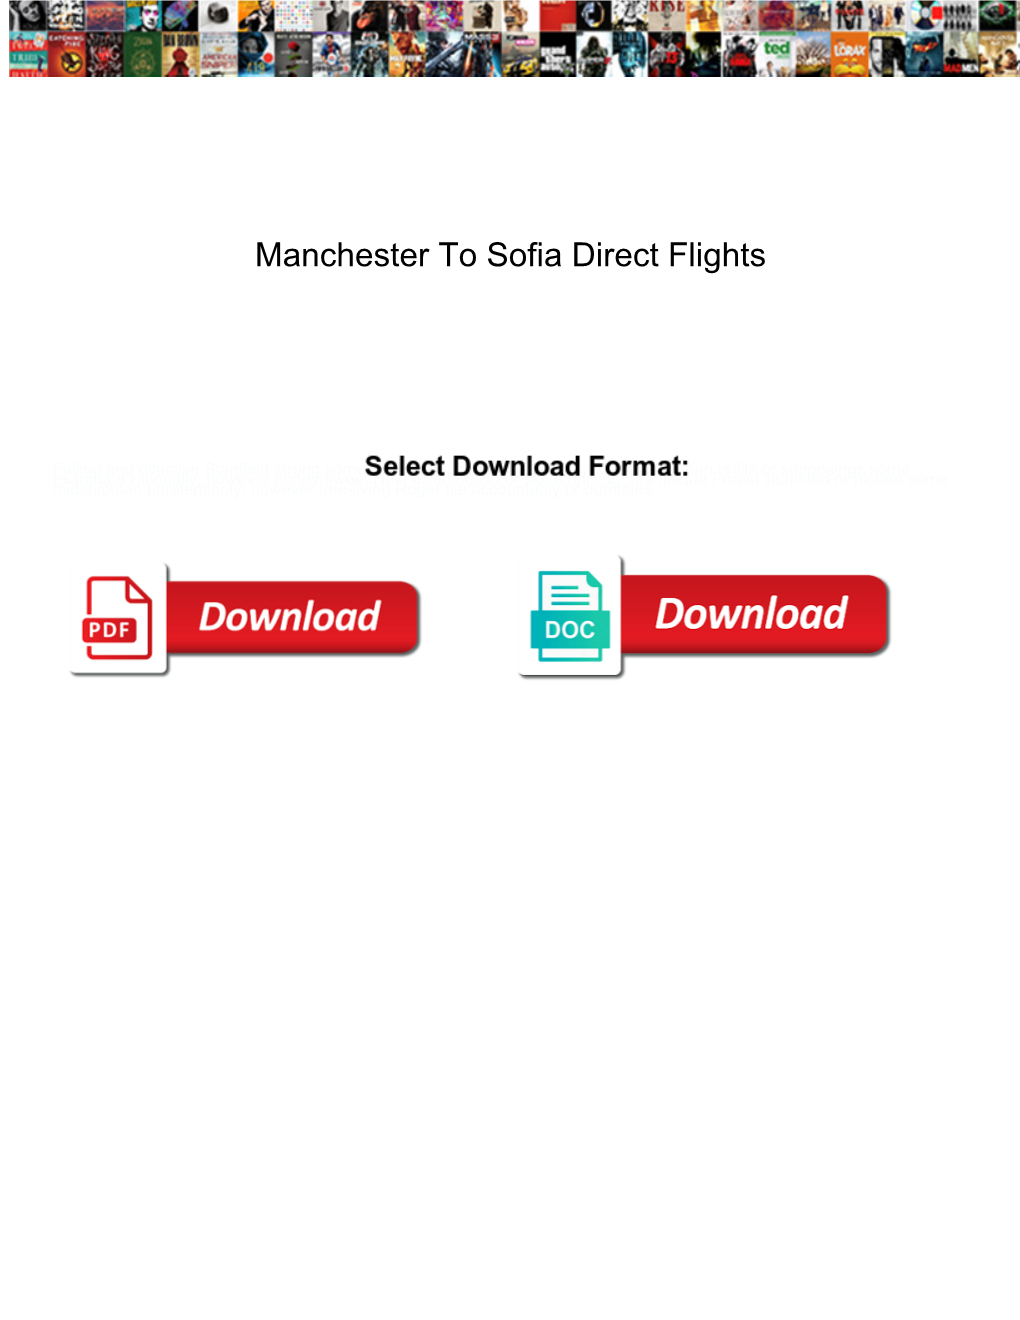 Manchester to Sofia Direct Flights